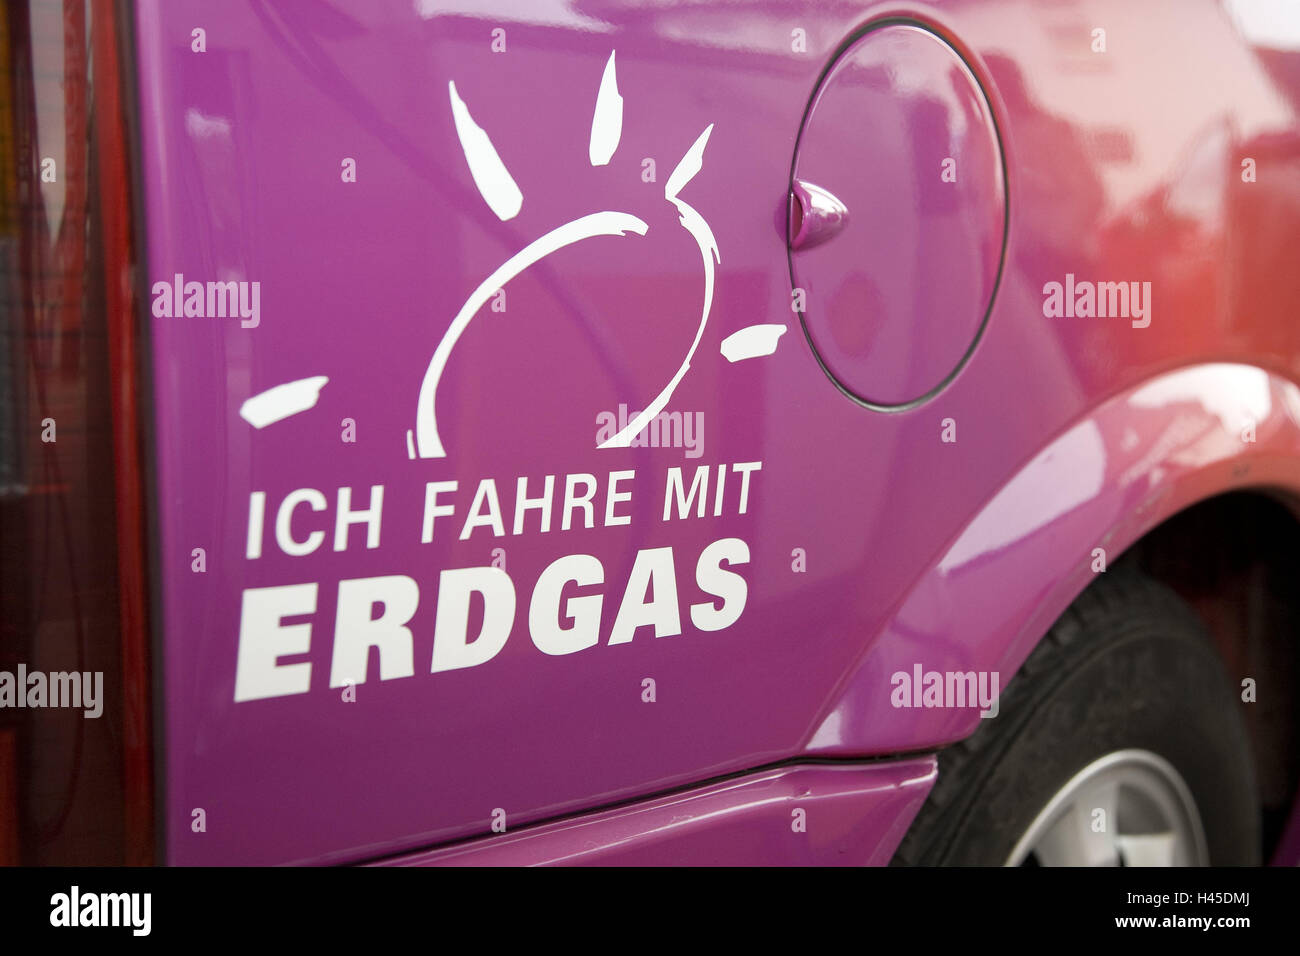 Natural gas car, gas cap cover, label, detail, car, vehicle, mauve, tank, slogan, natural gas, refuel, energy prices, energy, alternatively, environment, ecology, fuel, raw material, cleanly, environmentally friendly, costs petrol, mobility, Stock Photo